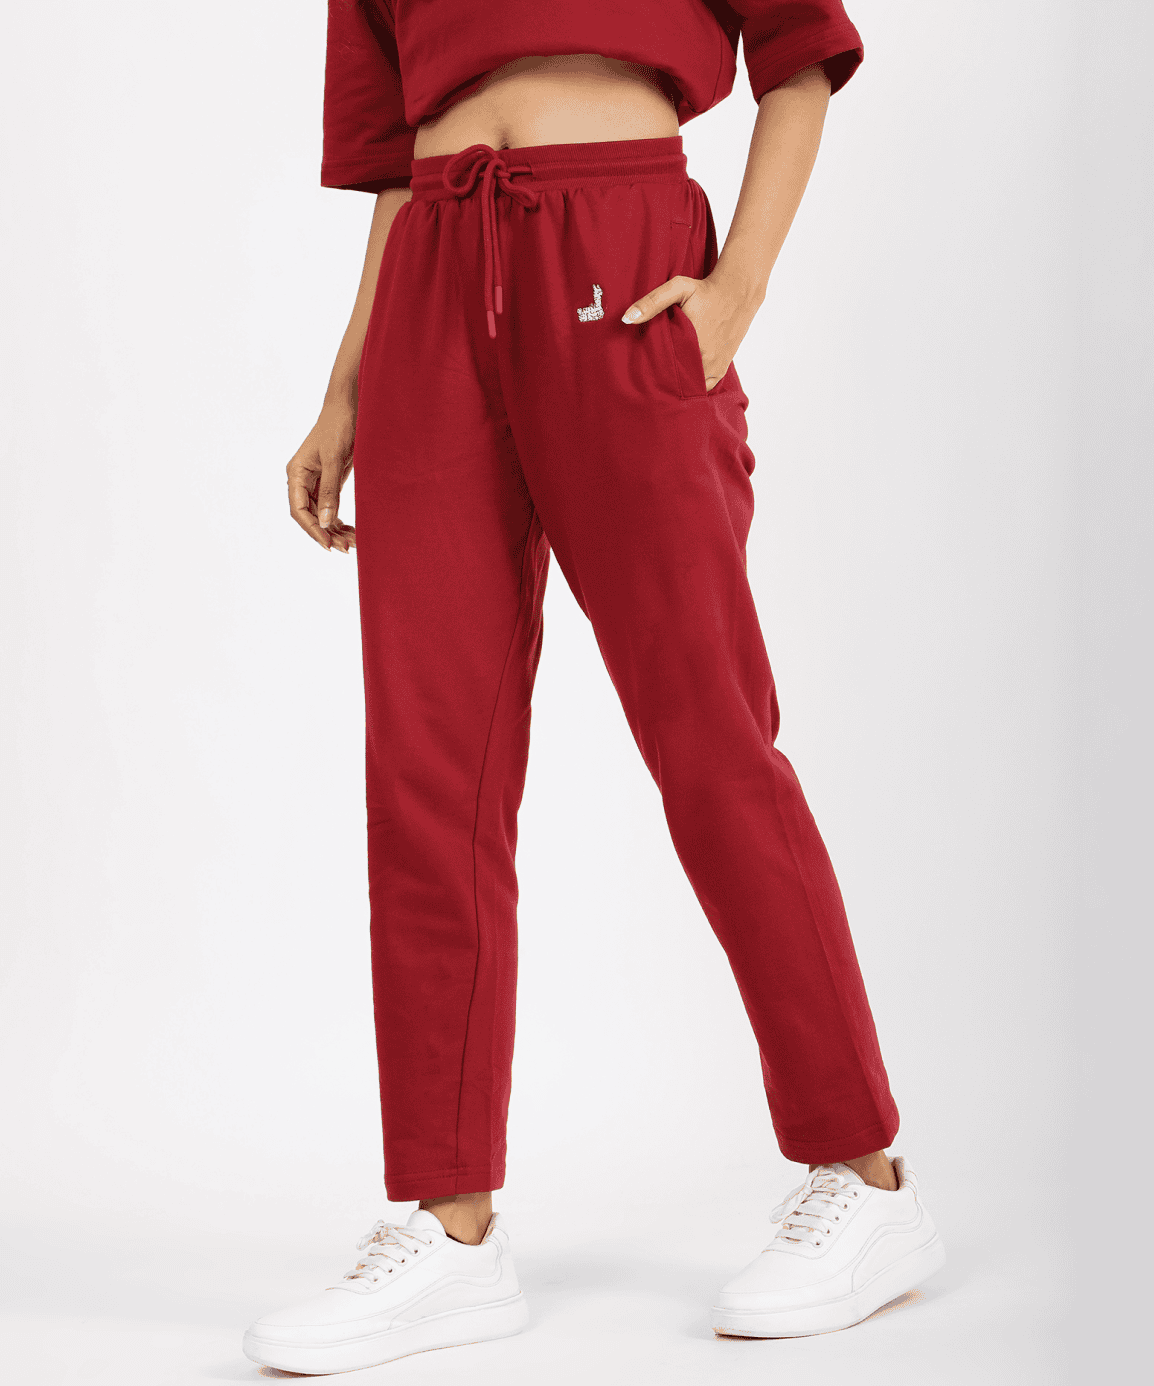 Red Hot Unisex Pants